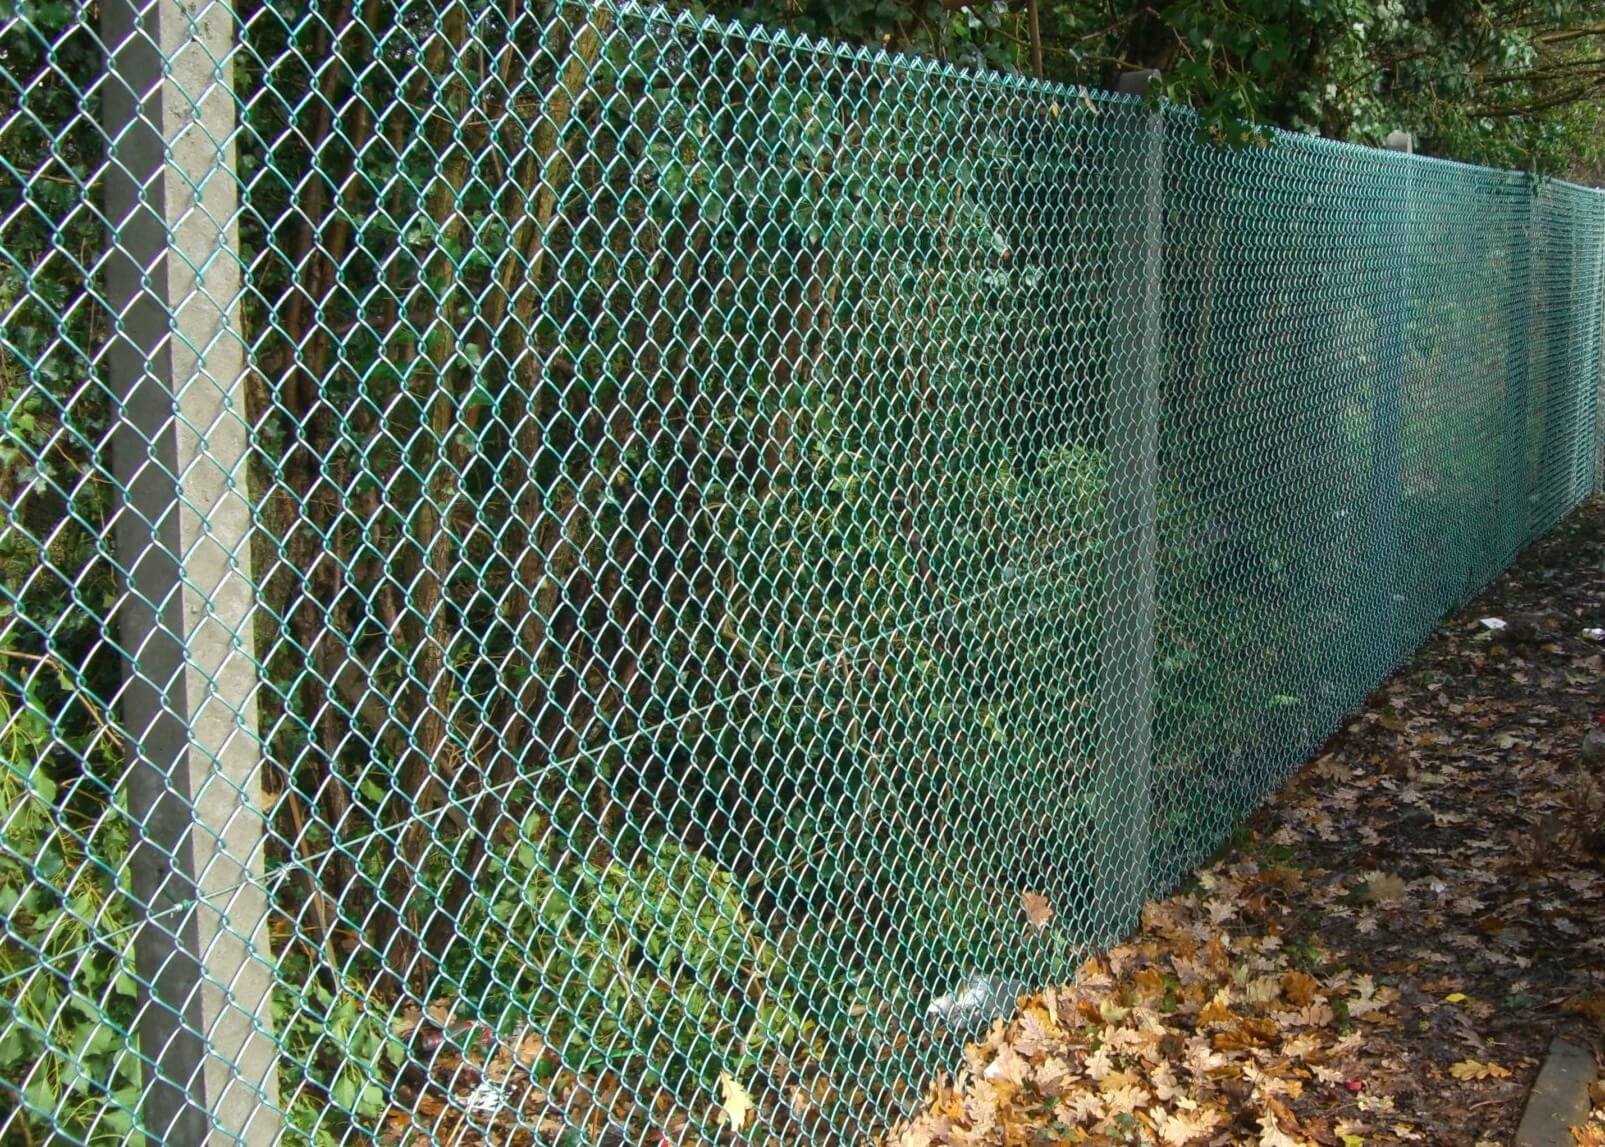 The Top Features of Chainlink Fencing That Set It Apart from Other Fencing Options